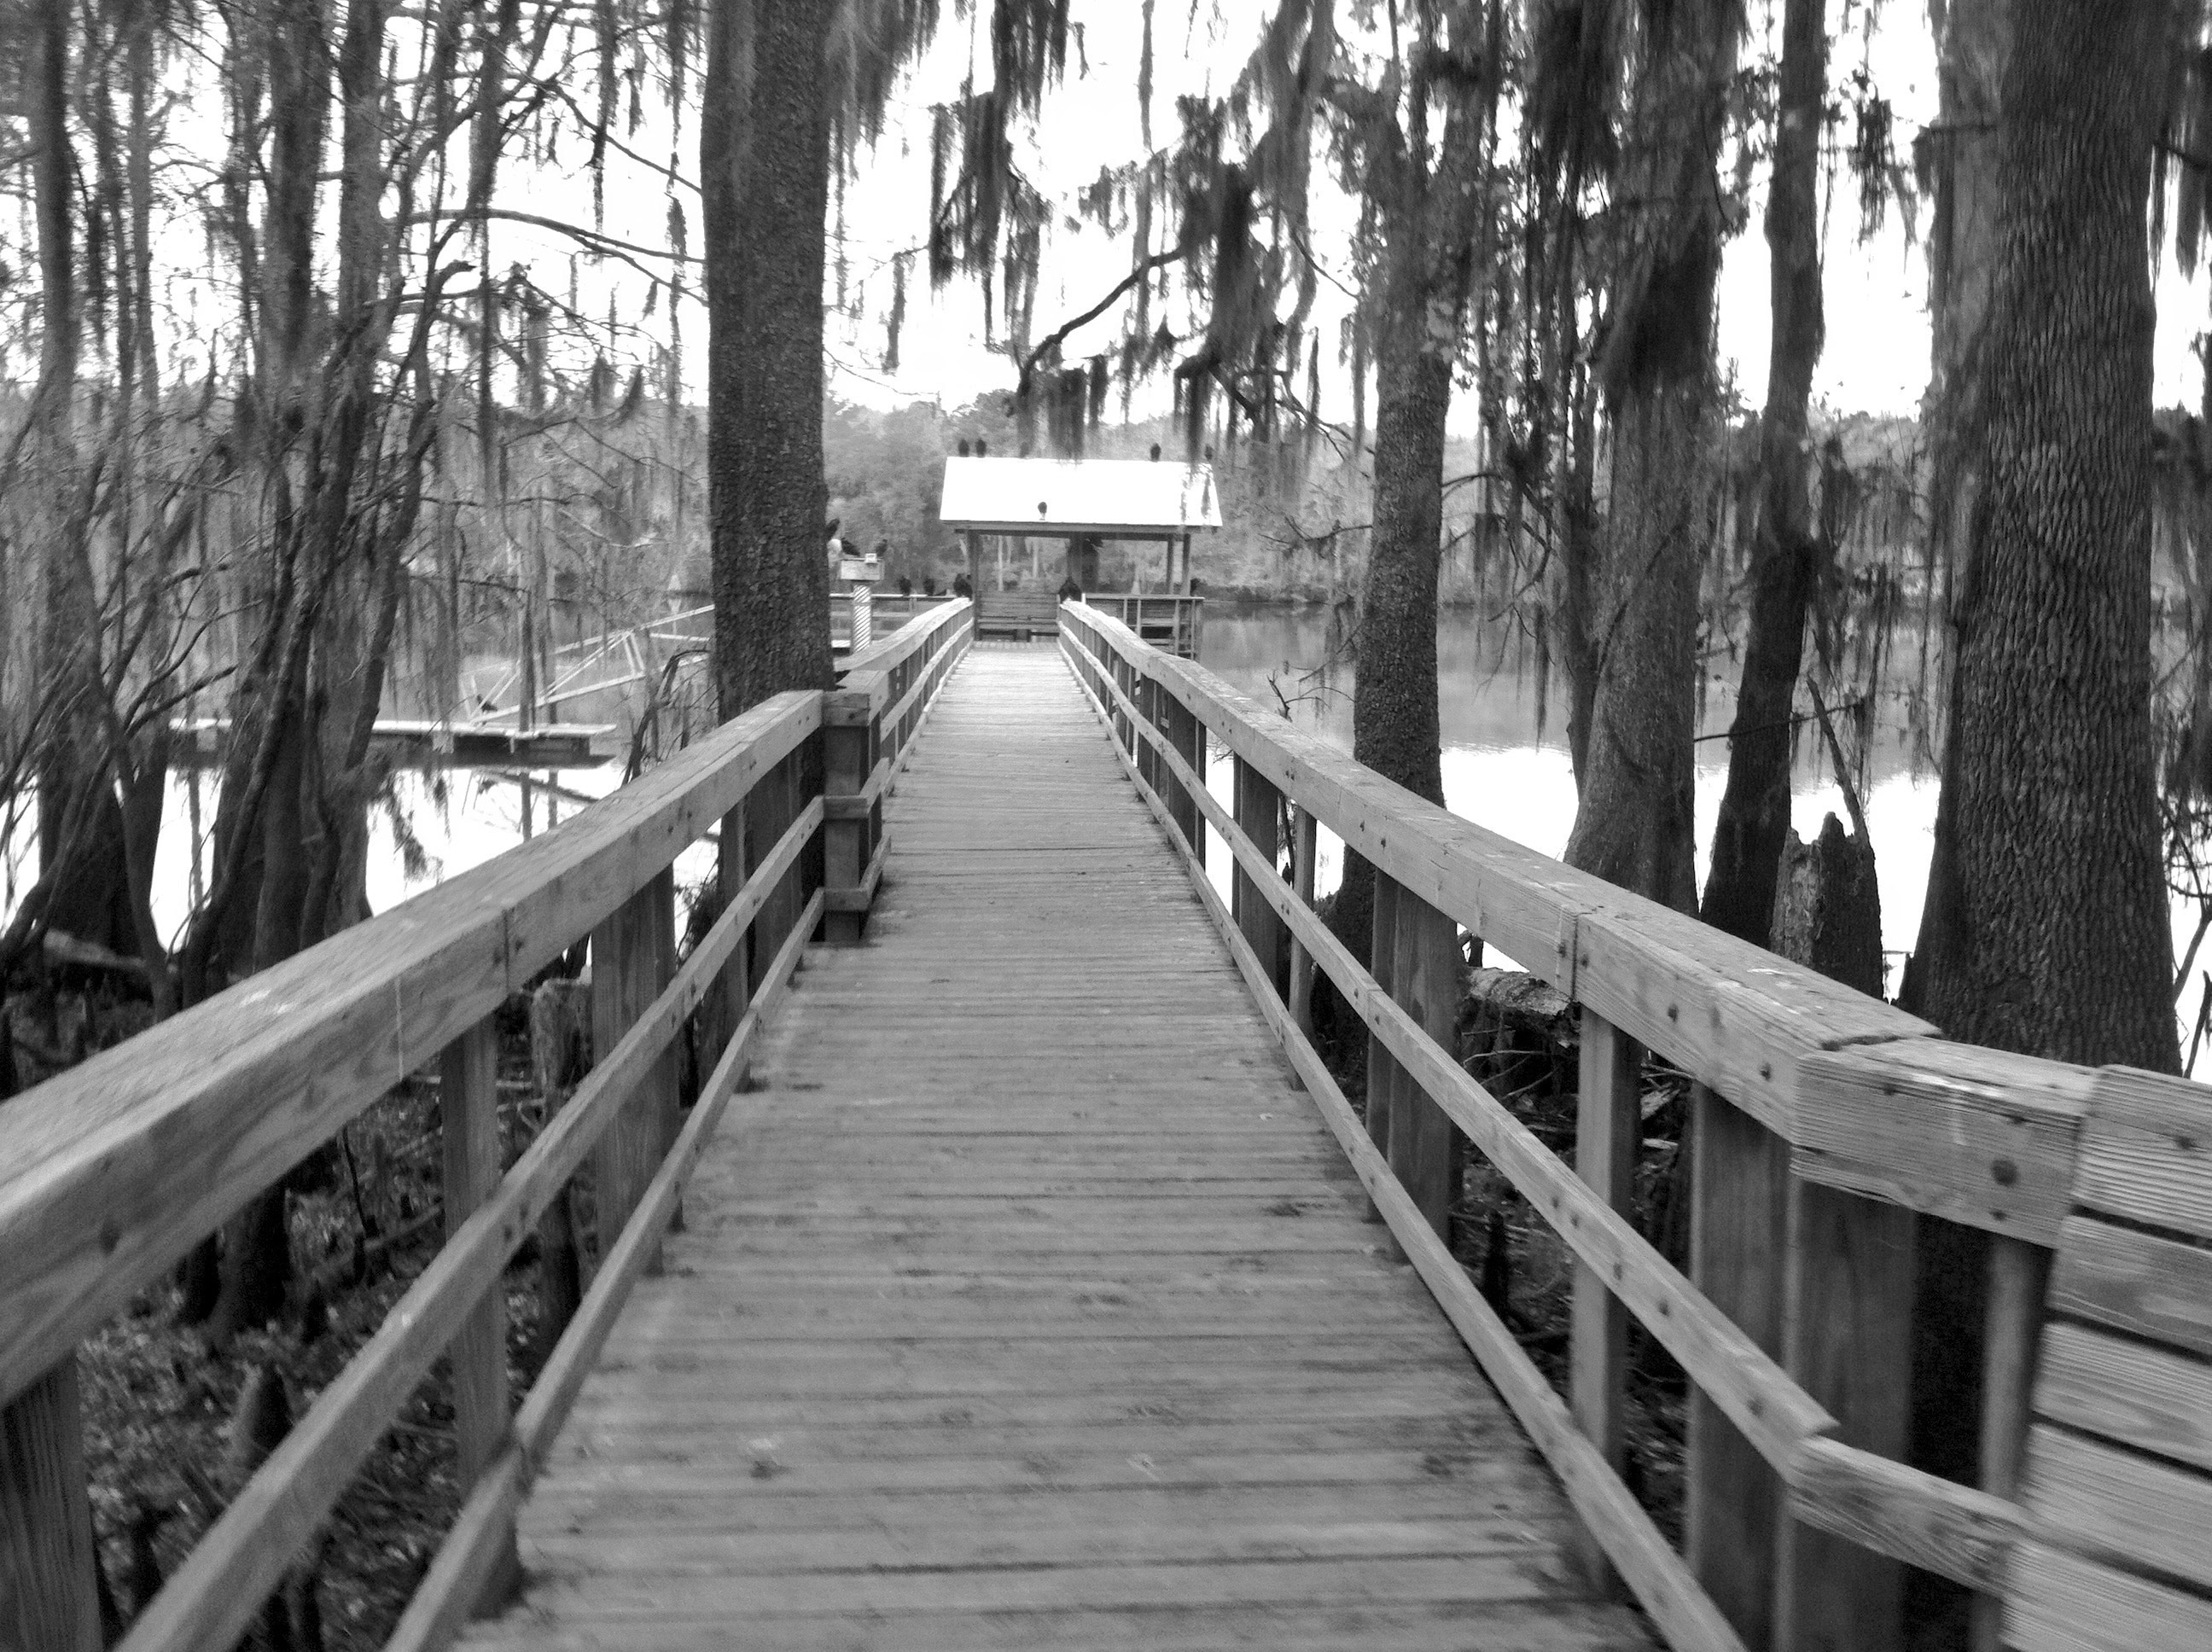 Ever seen a buzzard up close?  They are the biggest, ugliest birds ever.  They were perched all over this walkway as we walked out to look for manatees in the Swanee River.  This state park hardly had anyone visiting.  It was rustic looking with plenty of parking spaces between campsites.  Definitely on our return list.  The spring is super cool too.  But I'll always remember the buzzards....